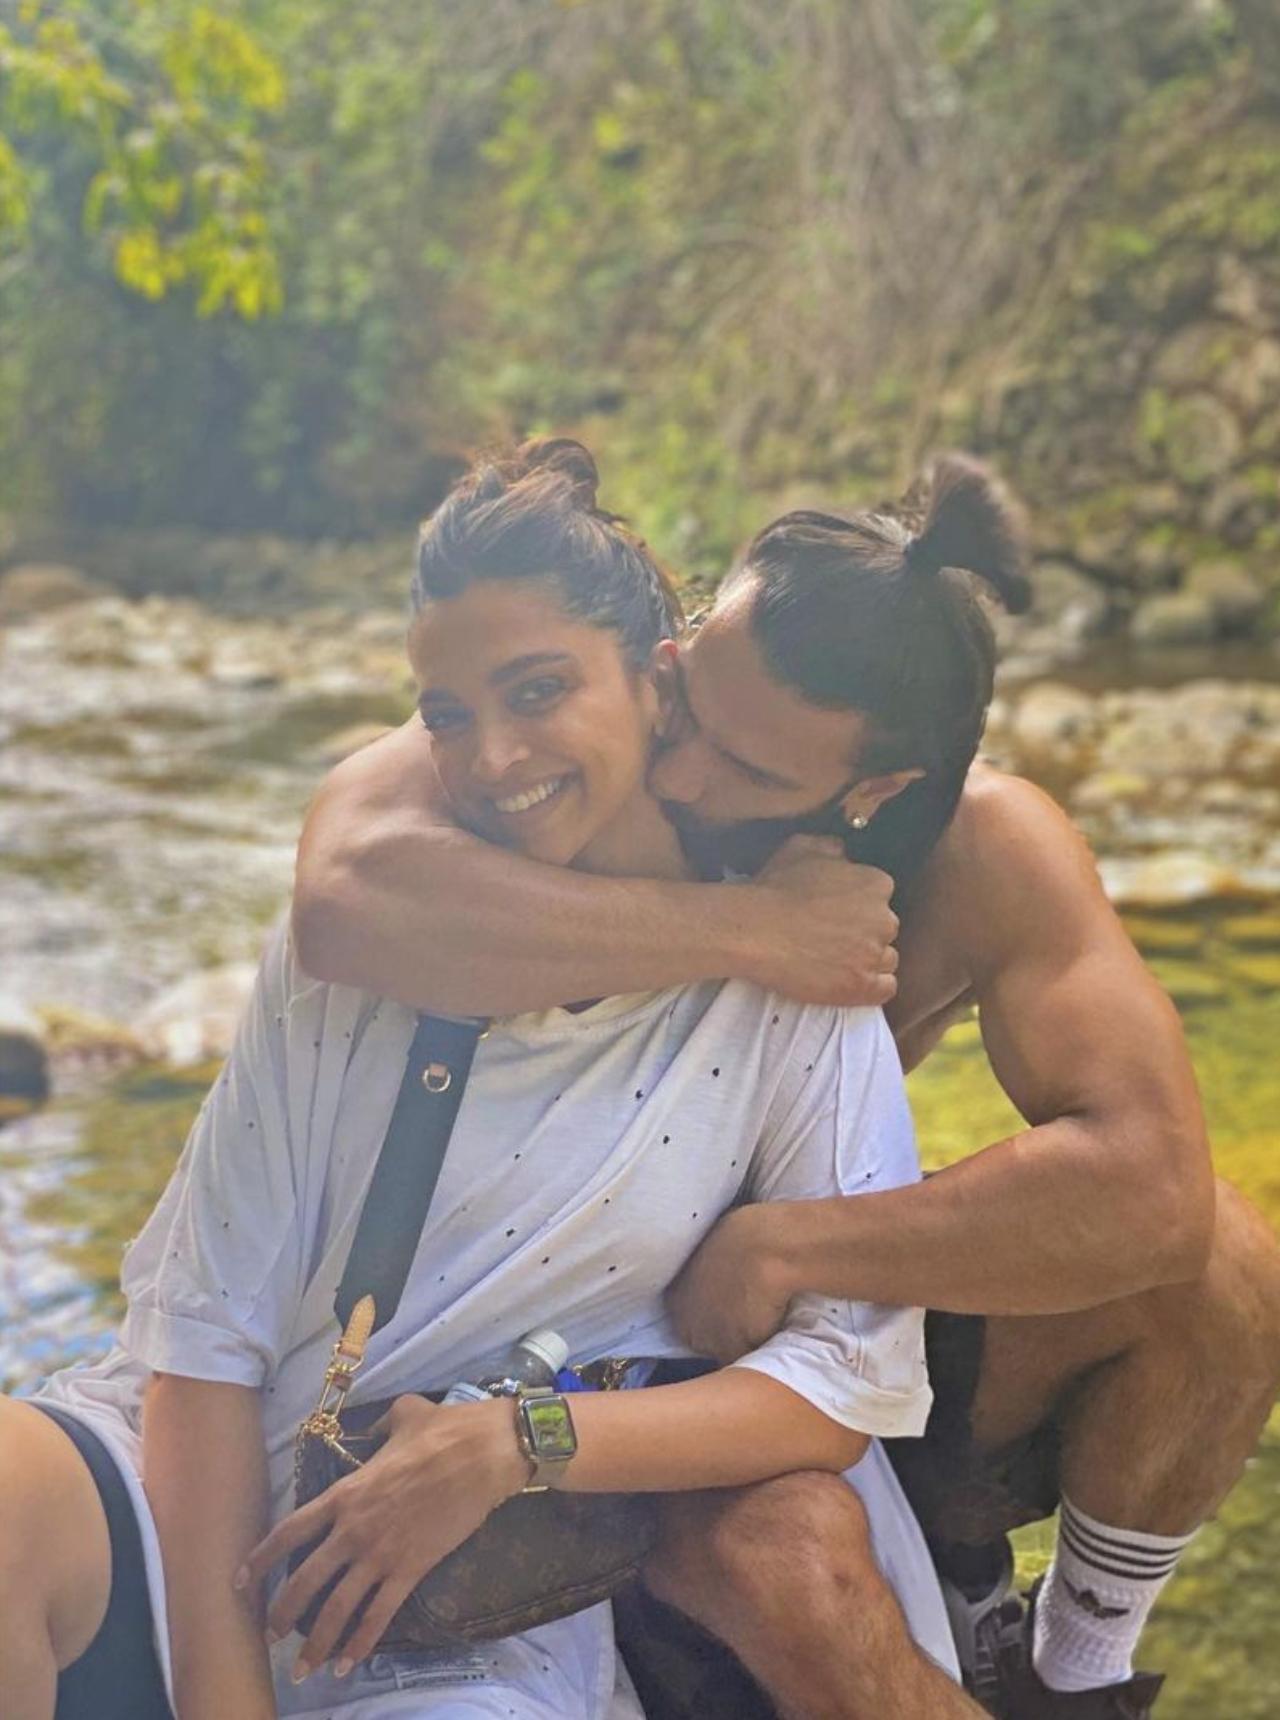 Recently, on Ranveer's birthday, Deepika Padukone did not drop any birthday post. Suspecting netizens started speculating that all is not well in paradise and rumours of a divorce began floating around